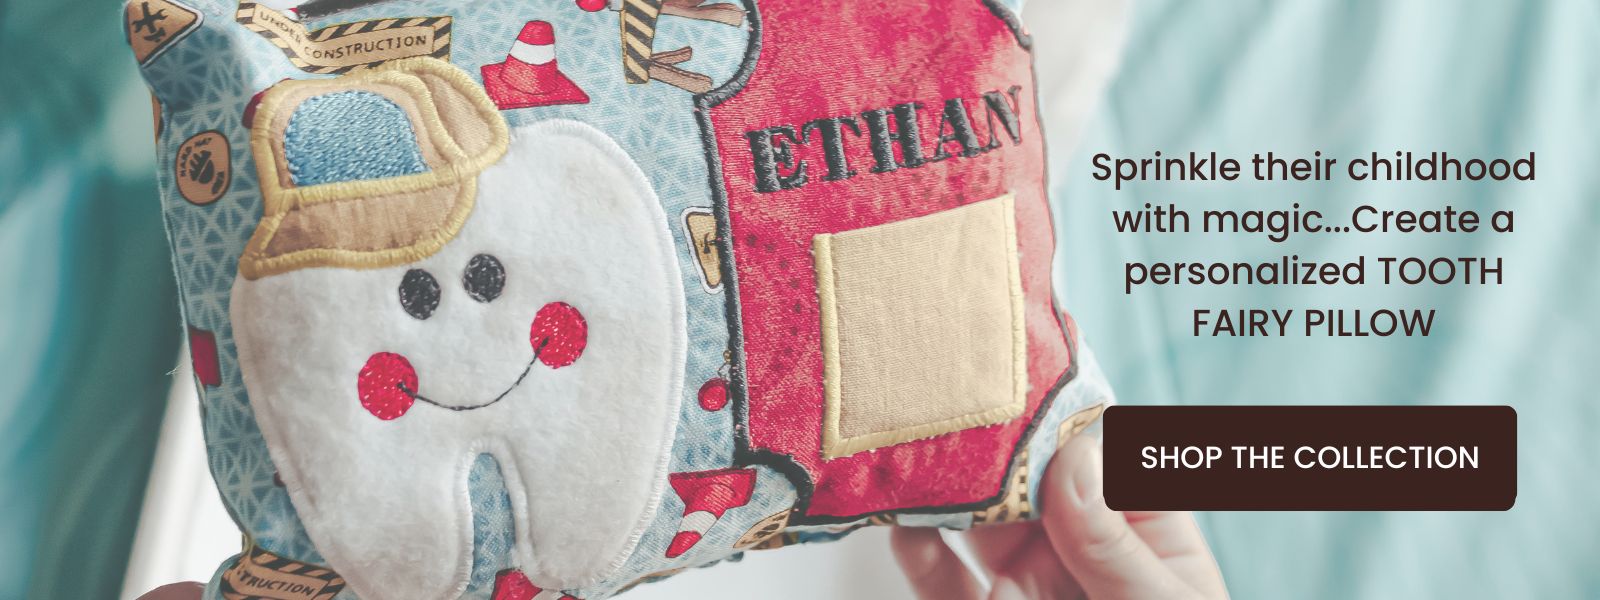 Hand holding a construction theme tooth fairy pillow personalized with the name Ethan